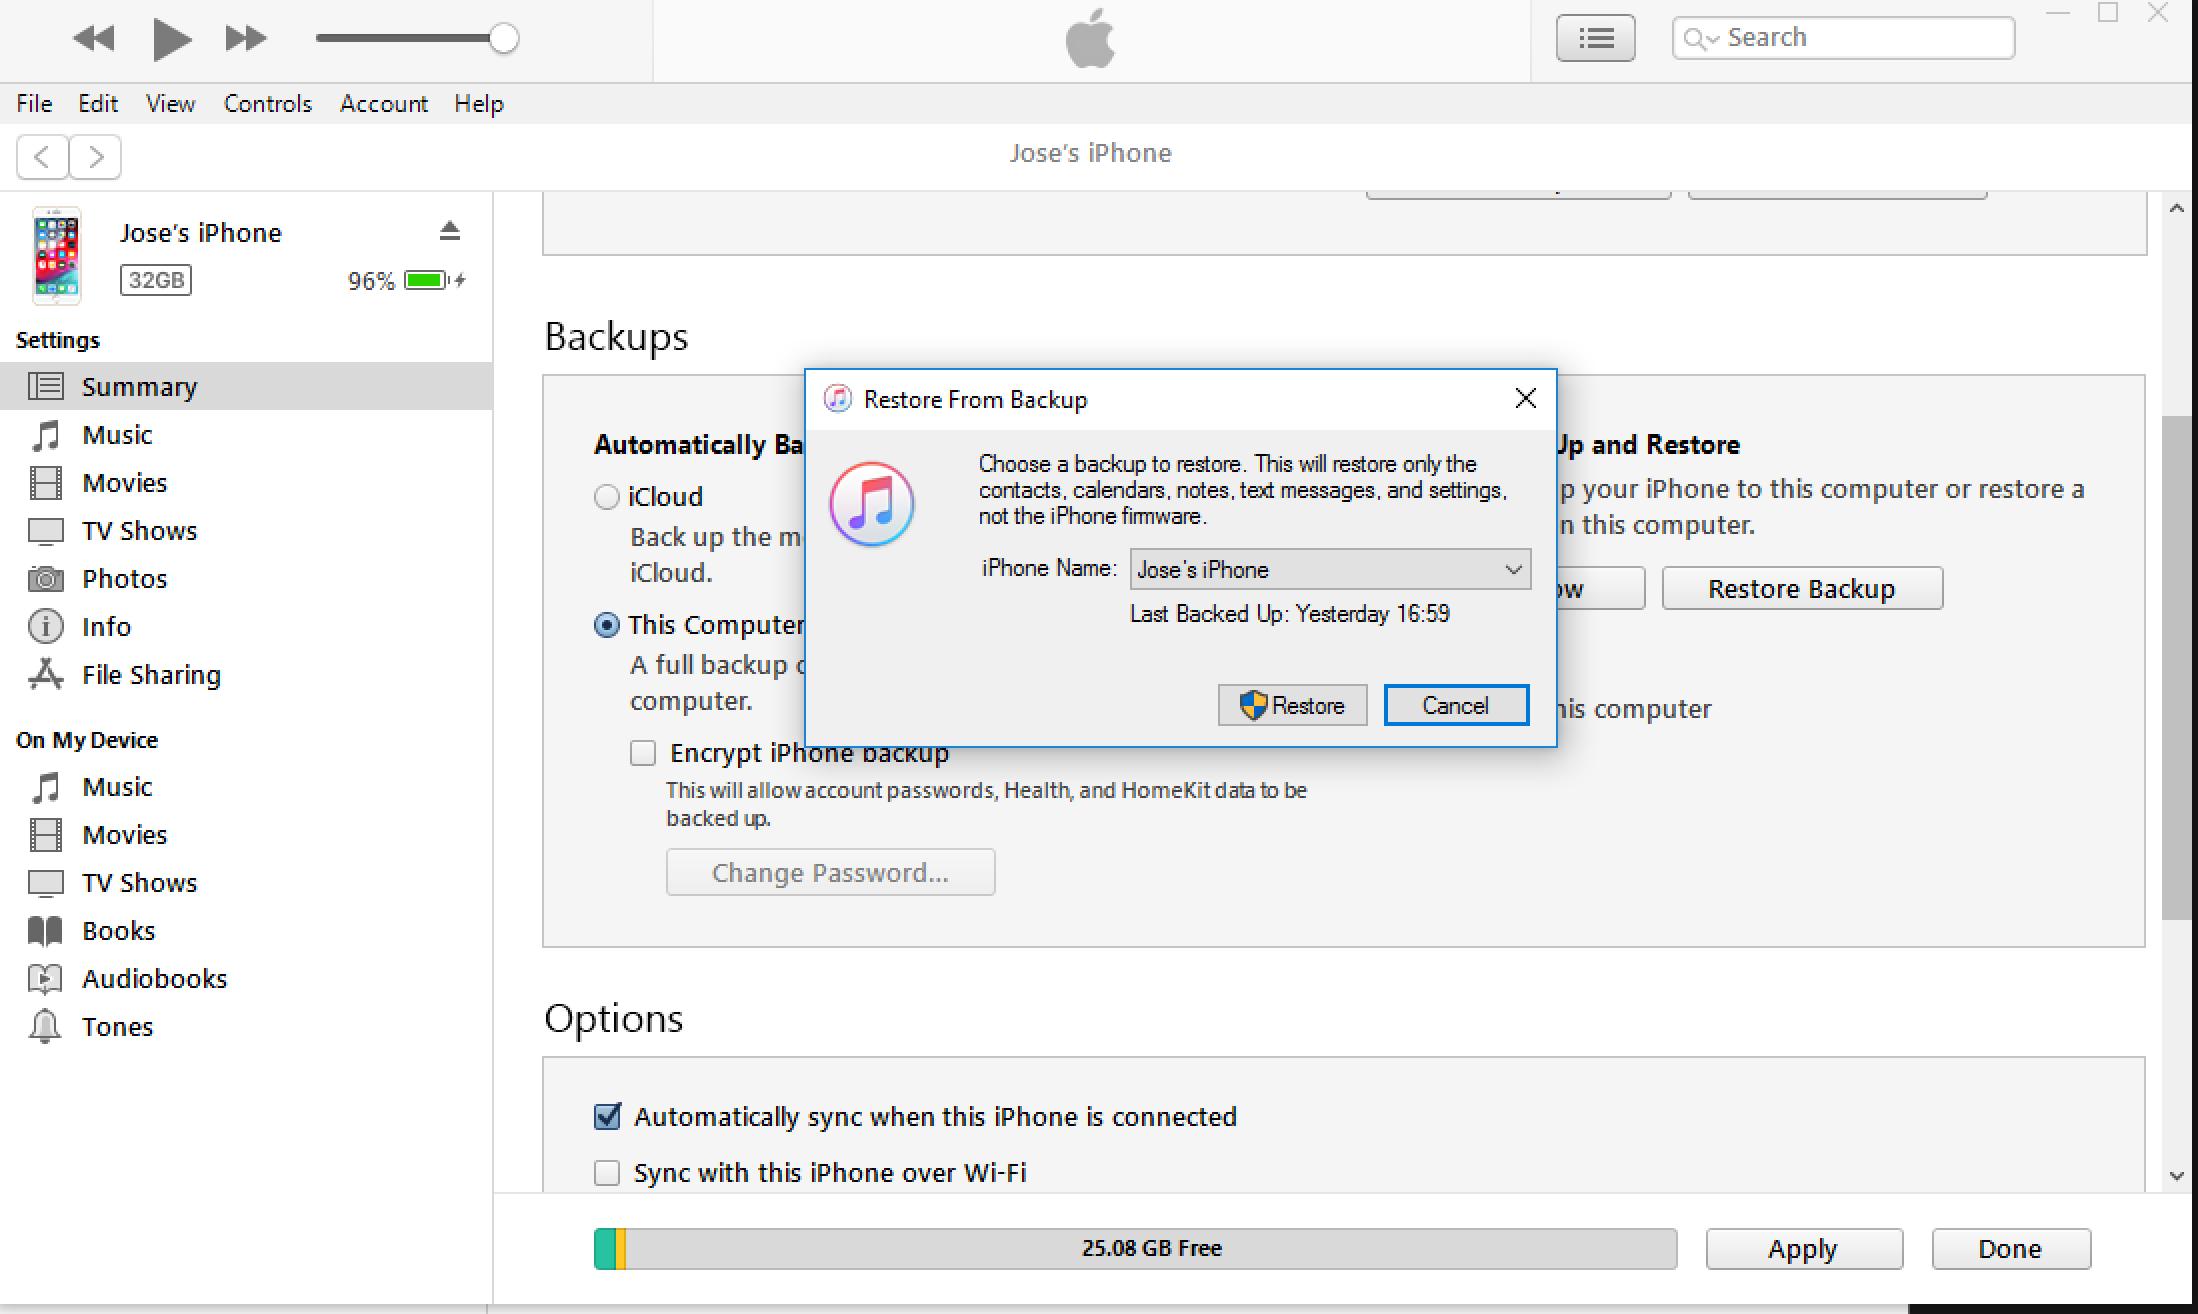 recover-voice-momos-from-iTunes-backups 01